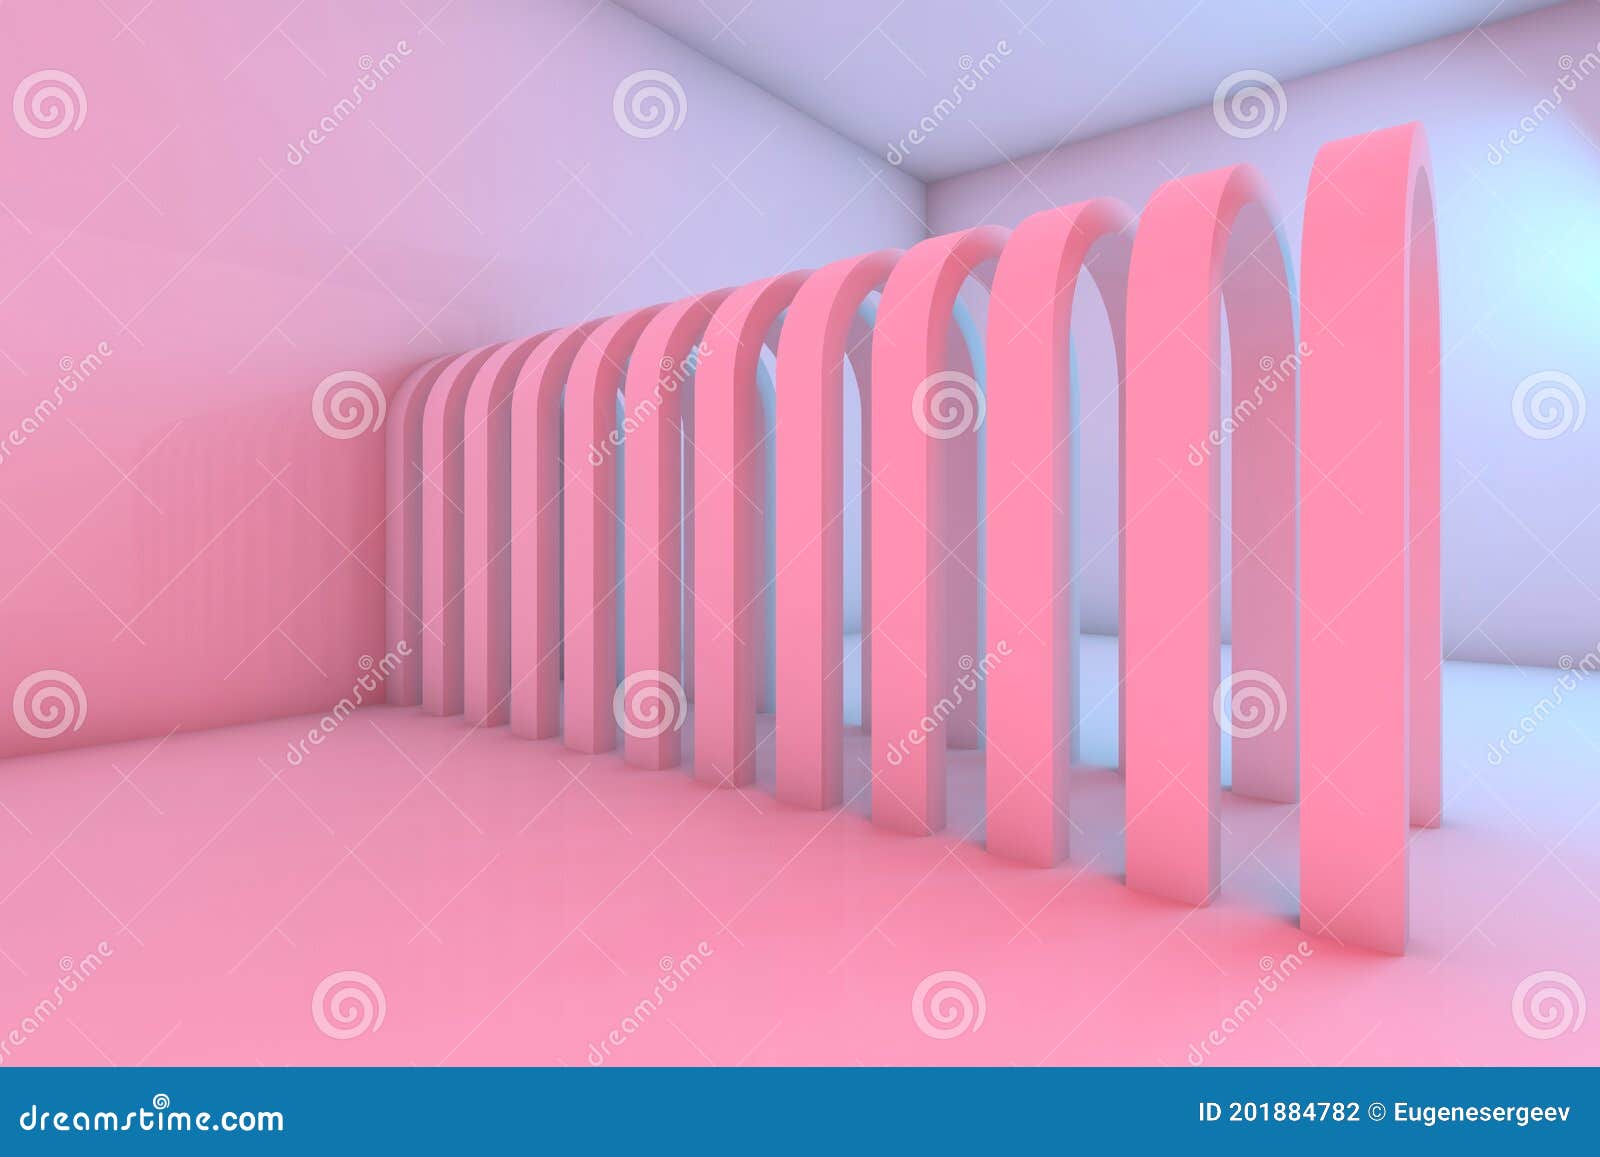 Corridor of Arches in an Empty Room Interior, 3d Stock Illustration ...